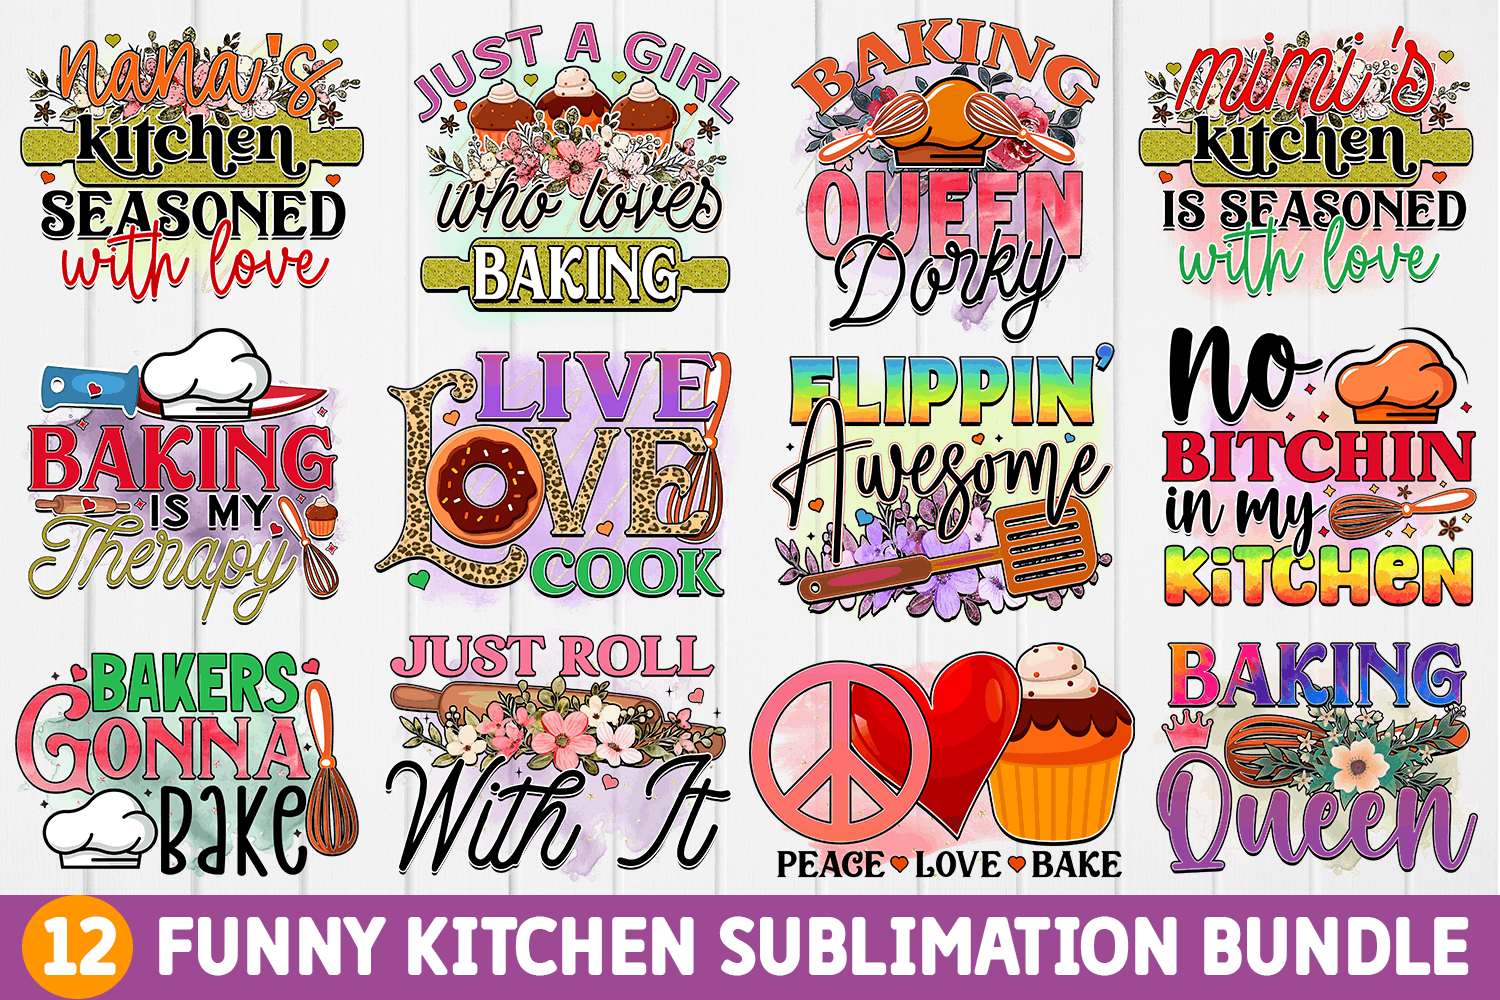 Rainbow friends characters PNG bundle, roblox inspired digital download  images for sublimation and printing crafts